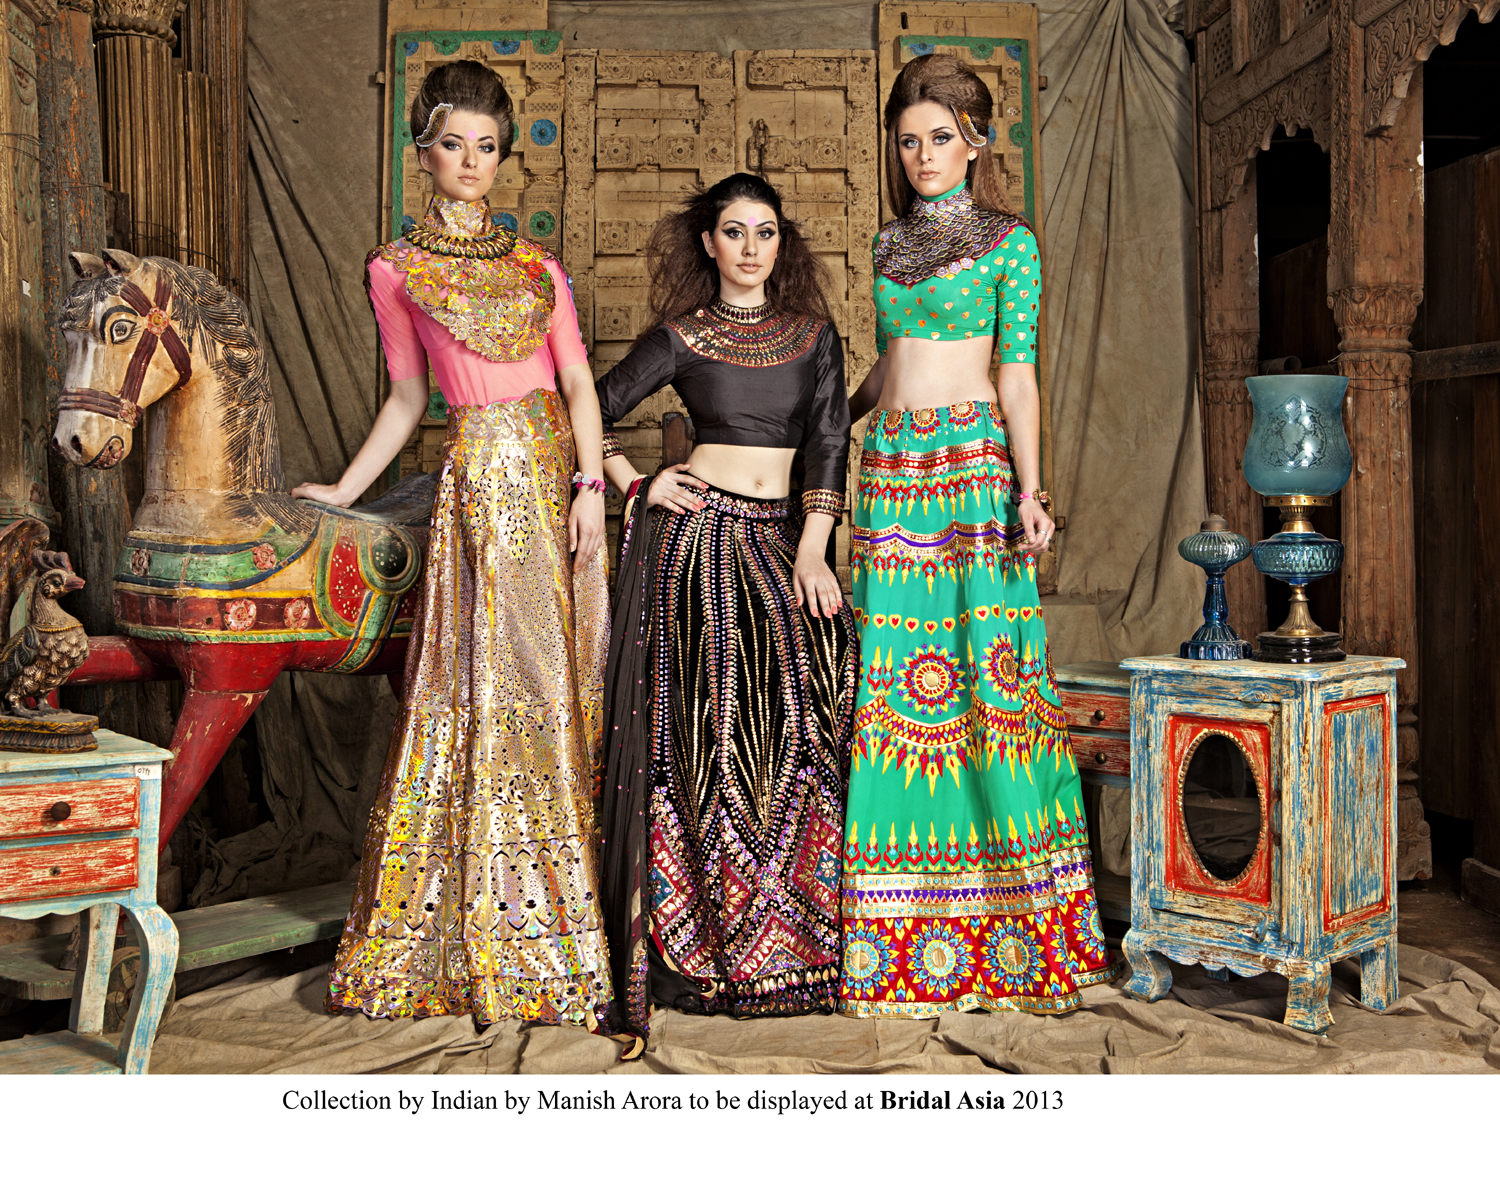 Collection by Indian by Manish Arora